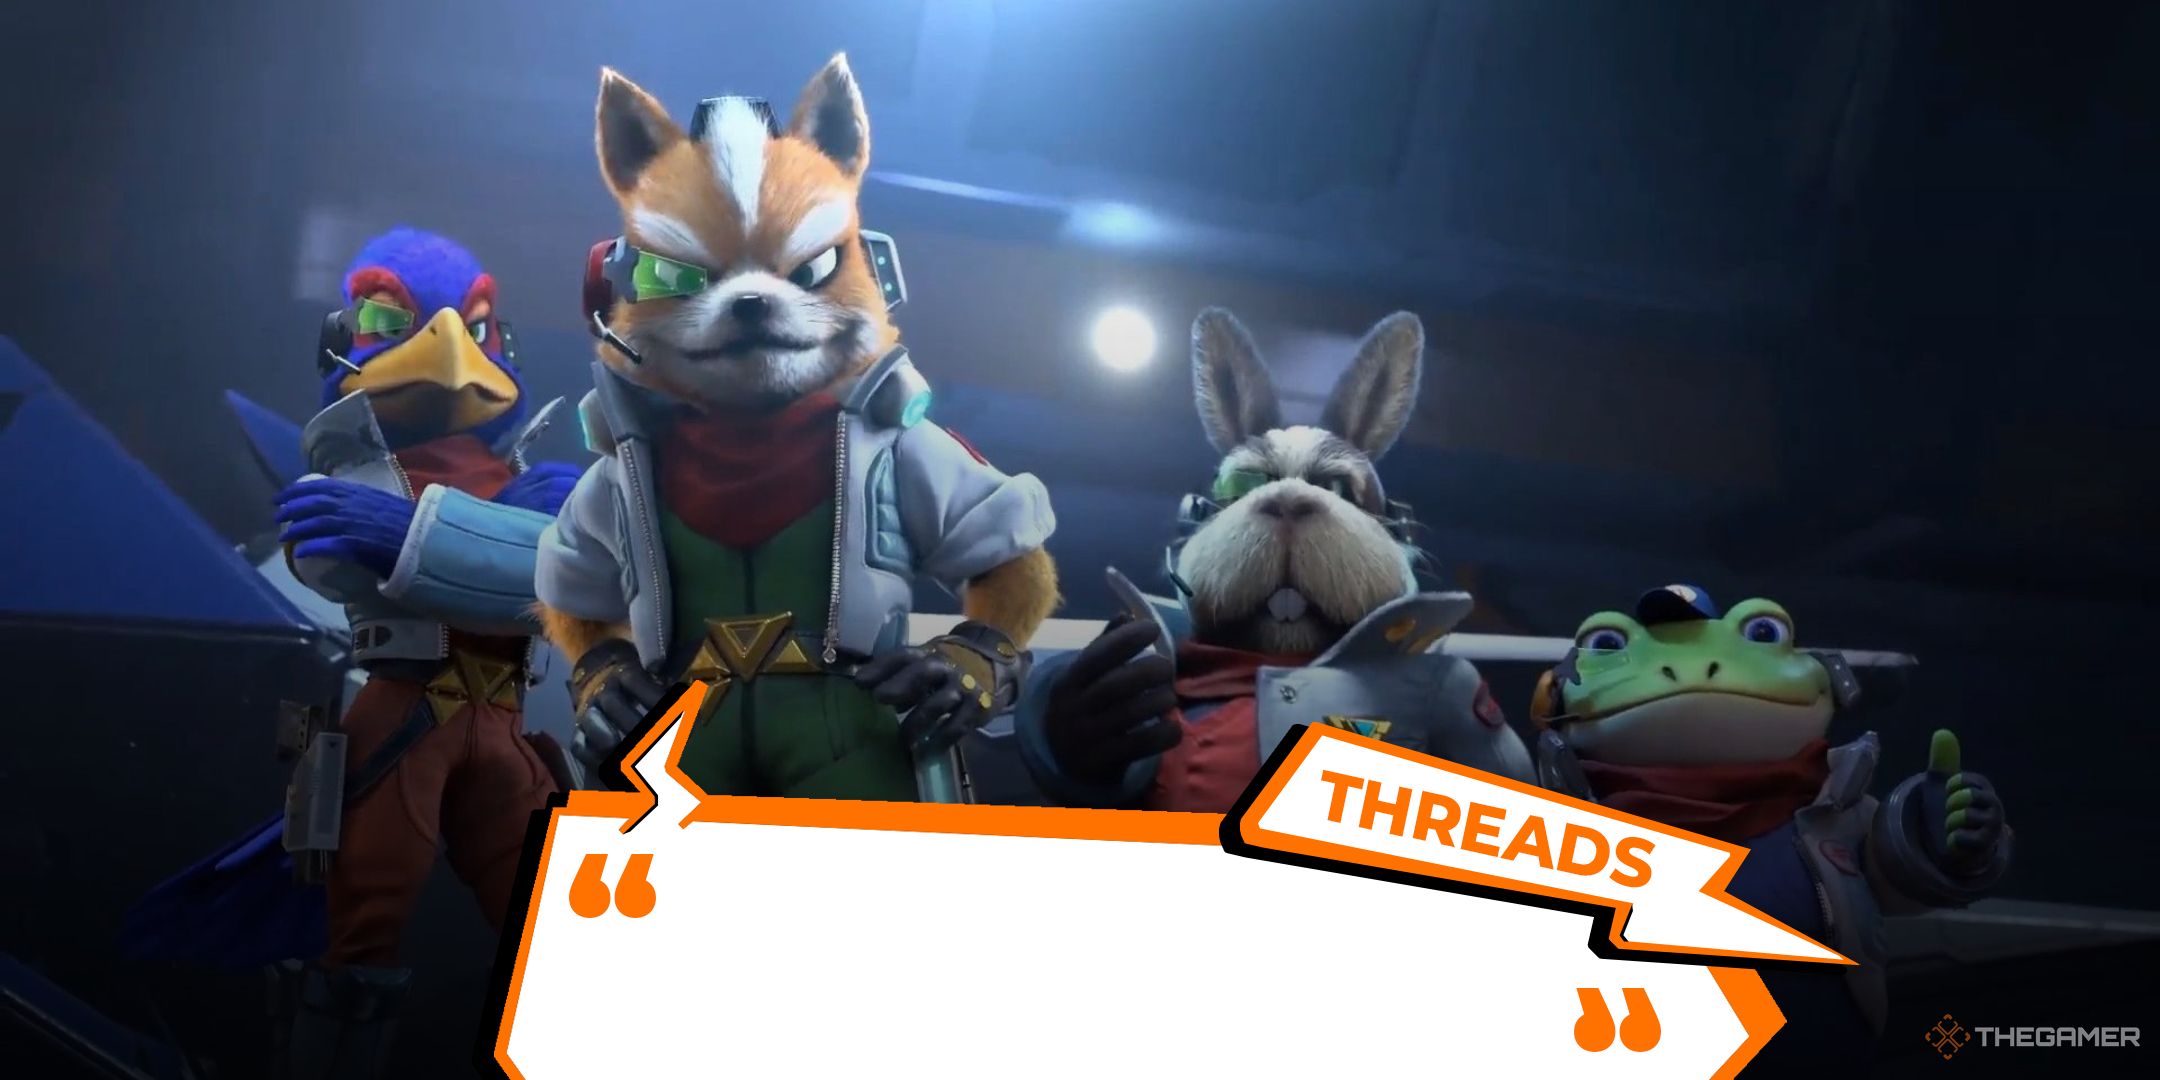 Falco Lombardi, Fox McCloud, Peppy Hare, and Slippy Toad with TheGamer's Threads logo superimposed